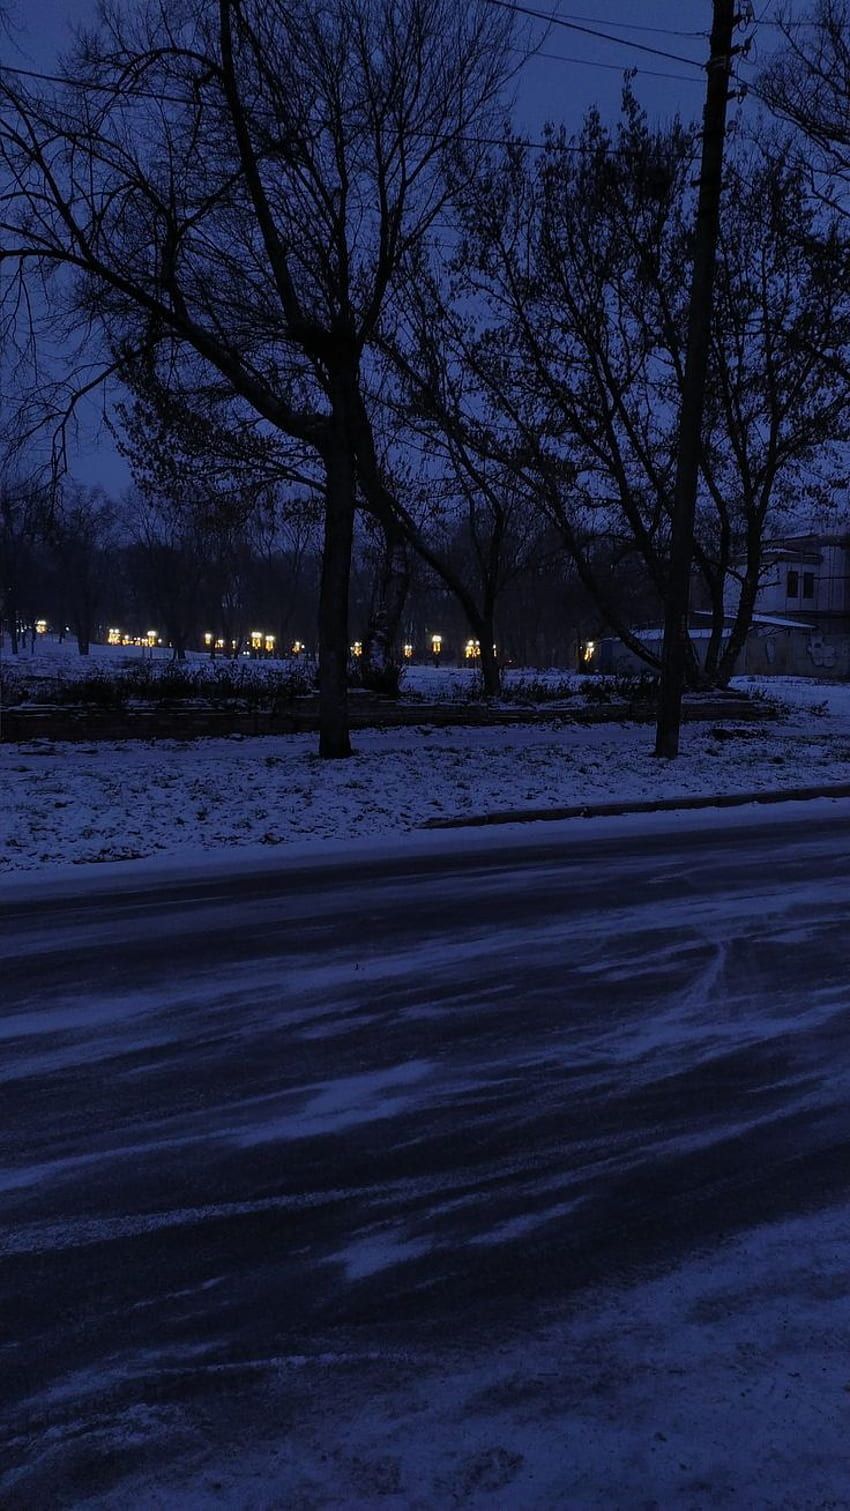 A street with snow on it at night - Scenery, outdoors